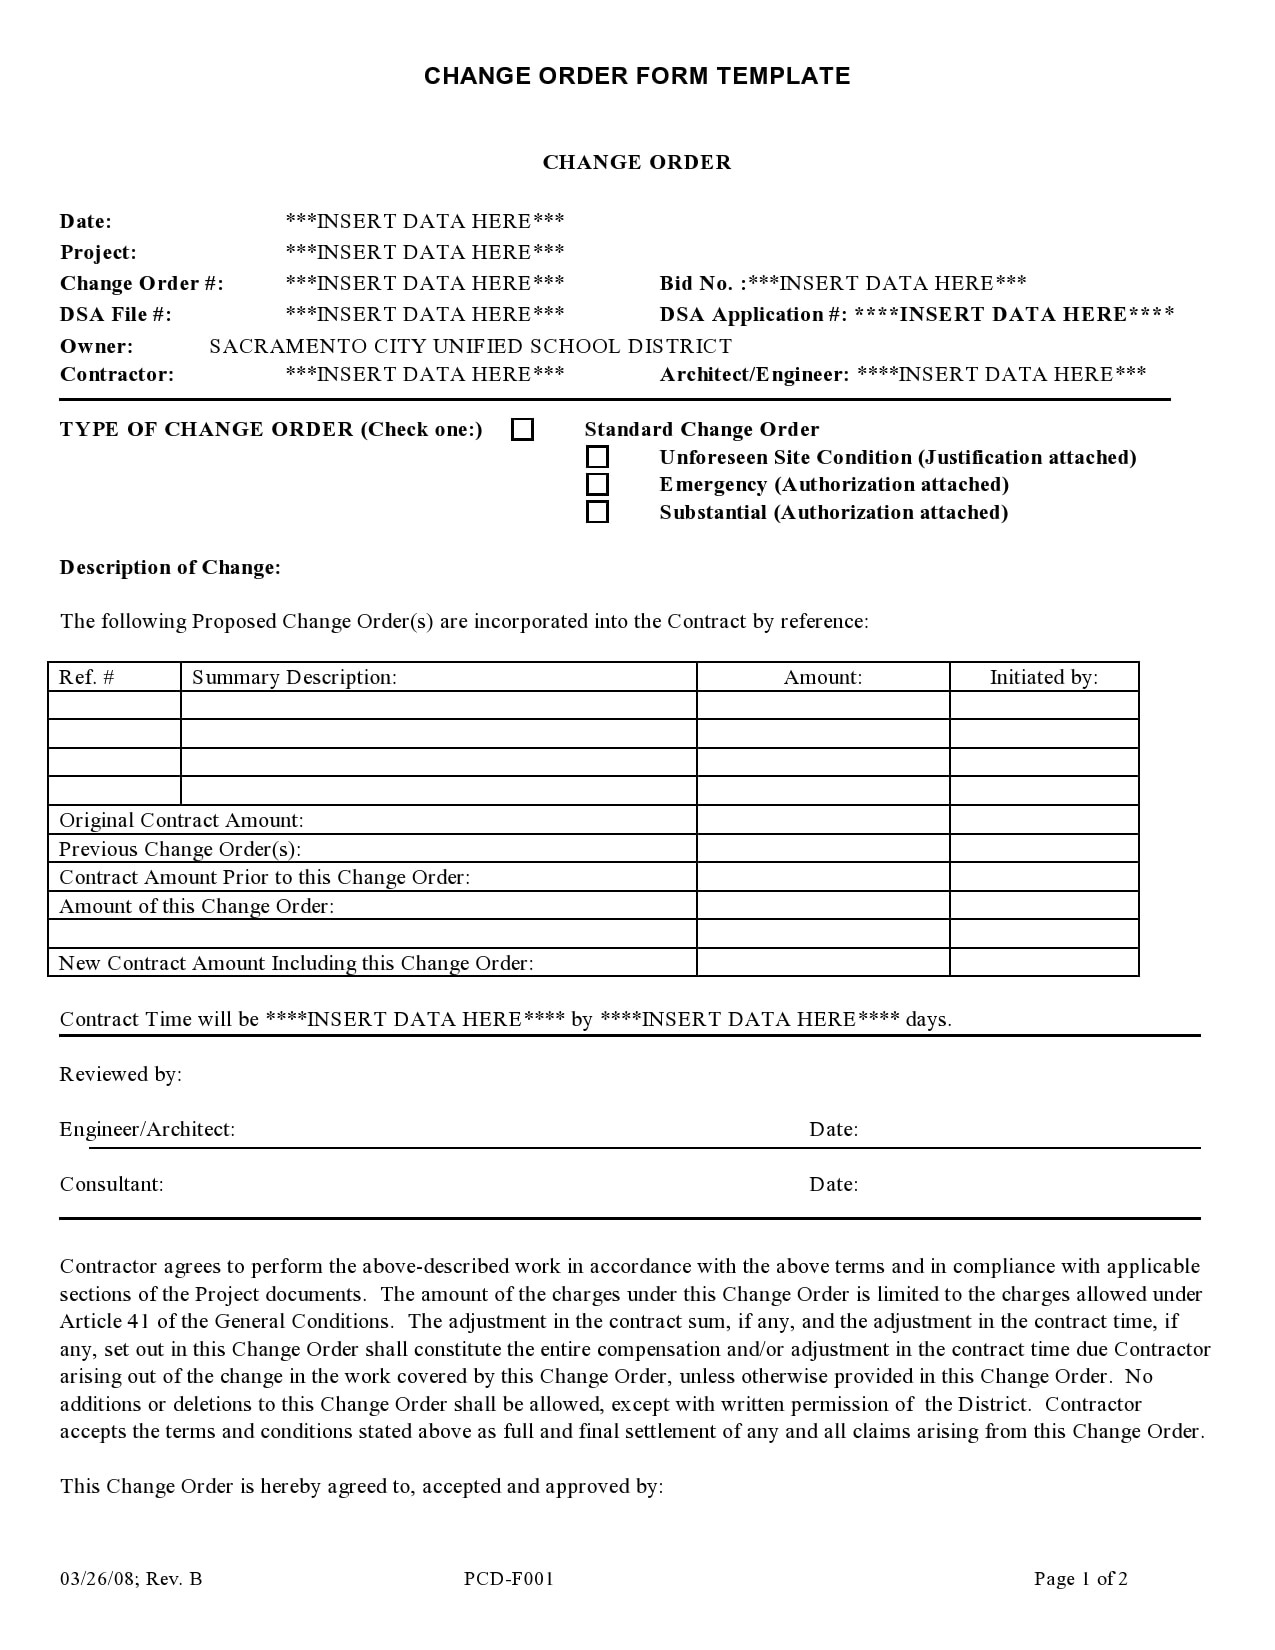 Customer Order Form Template Excel from templatearchive.com